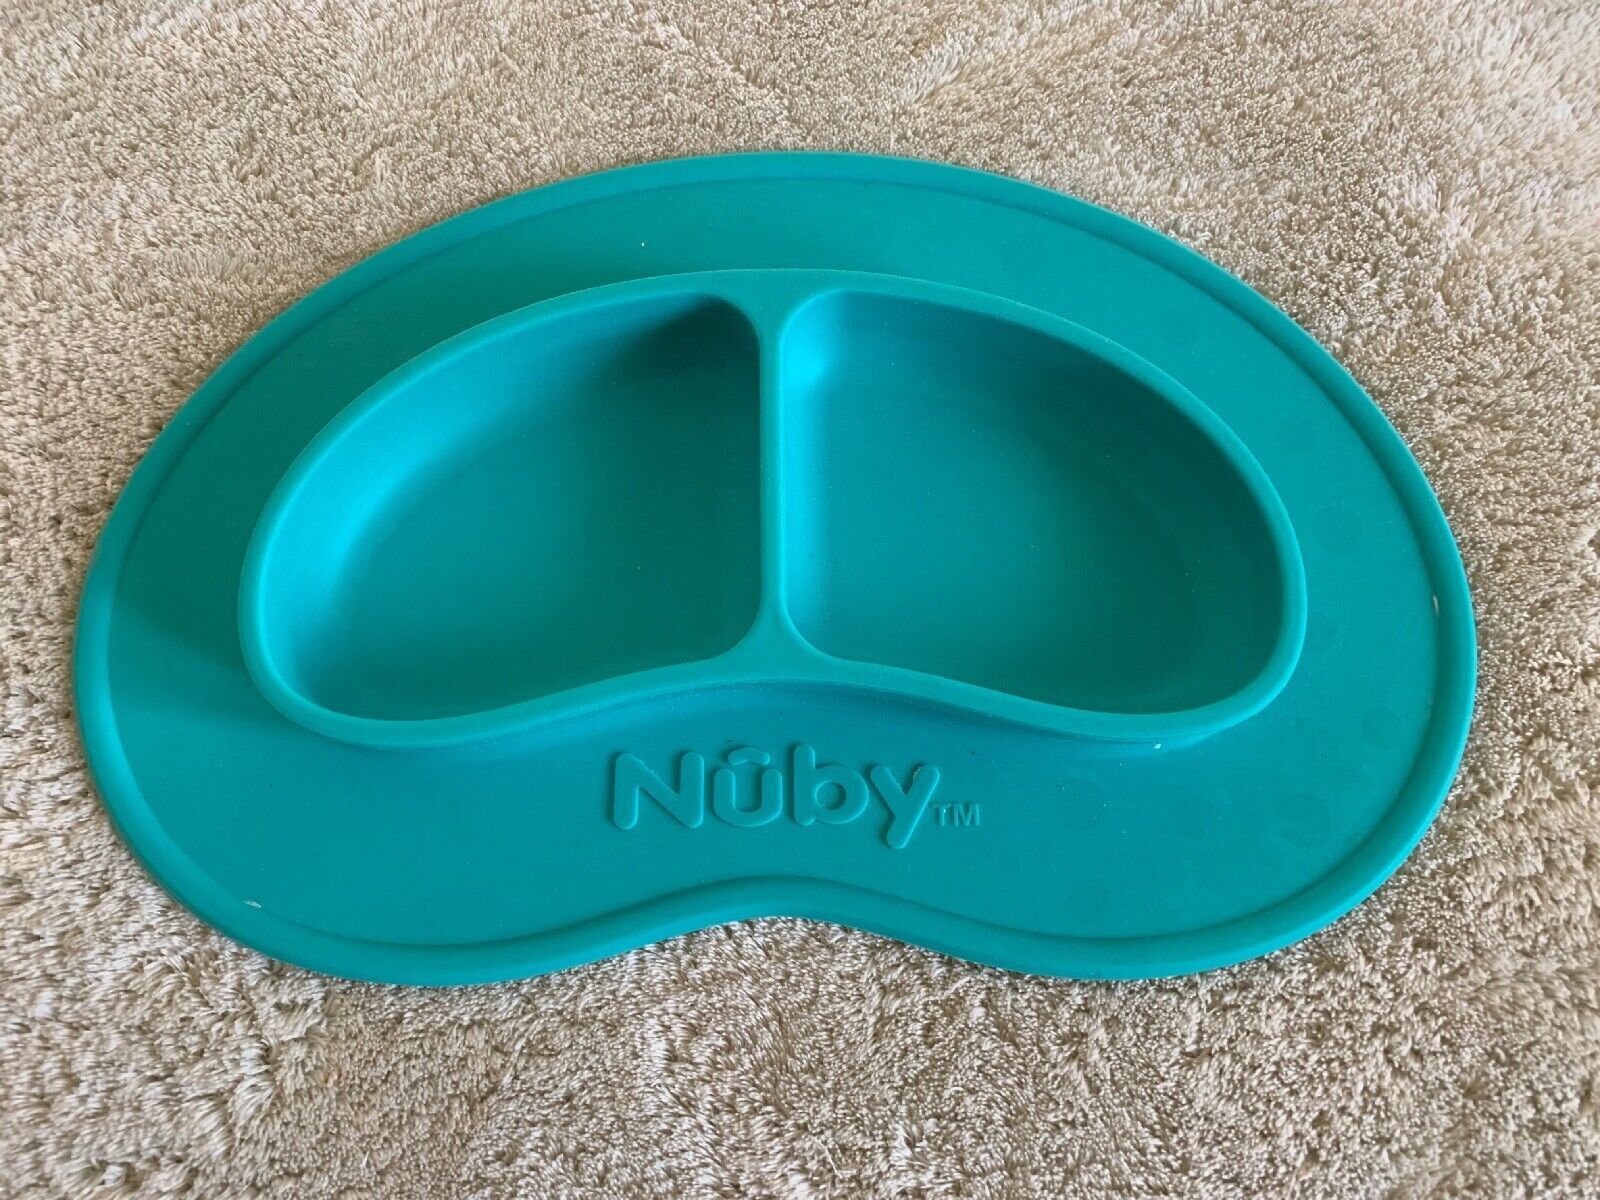 Nuby Teal Sure Grip Miracle Mat Silicone Plate Dish Baby Toddler - $12.25